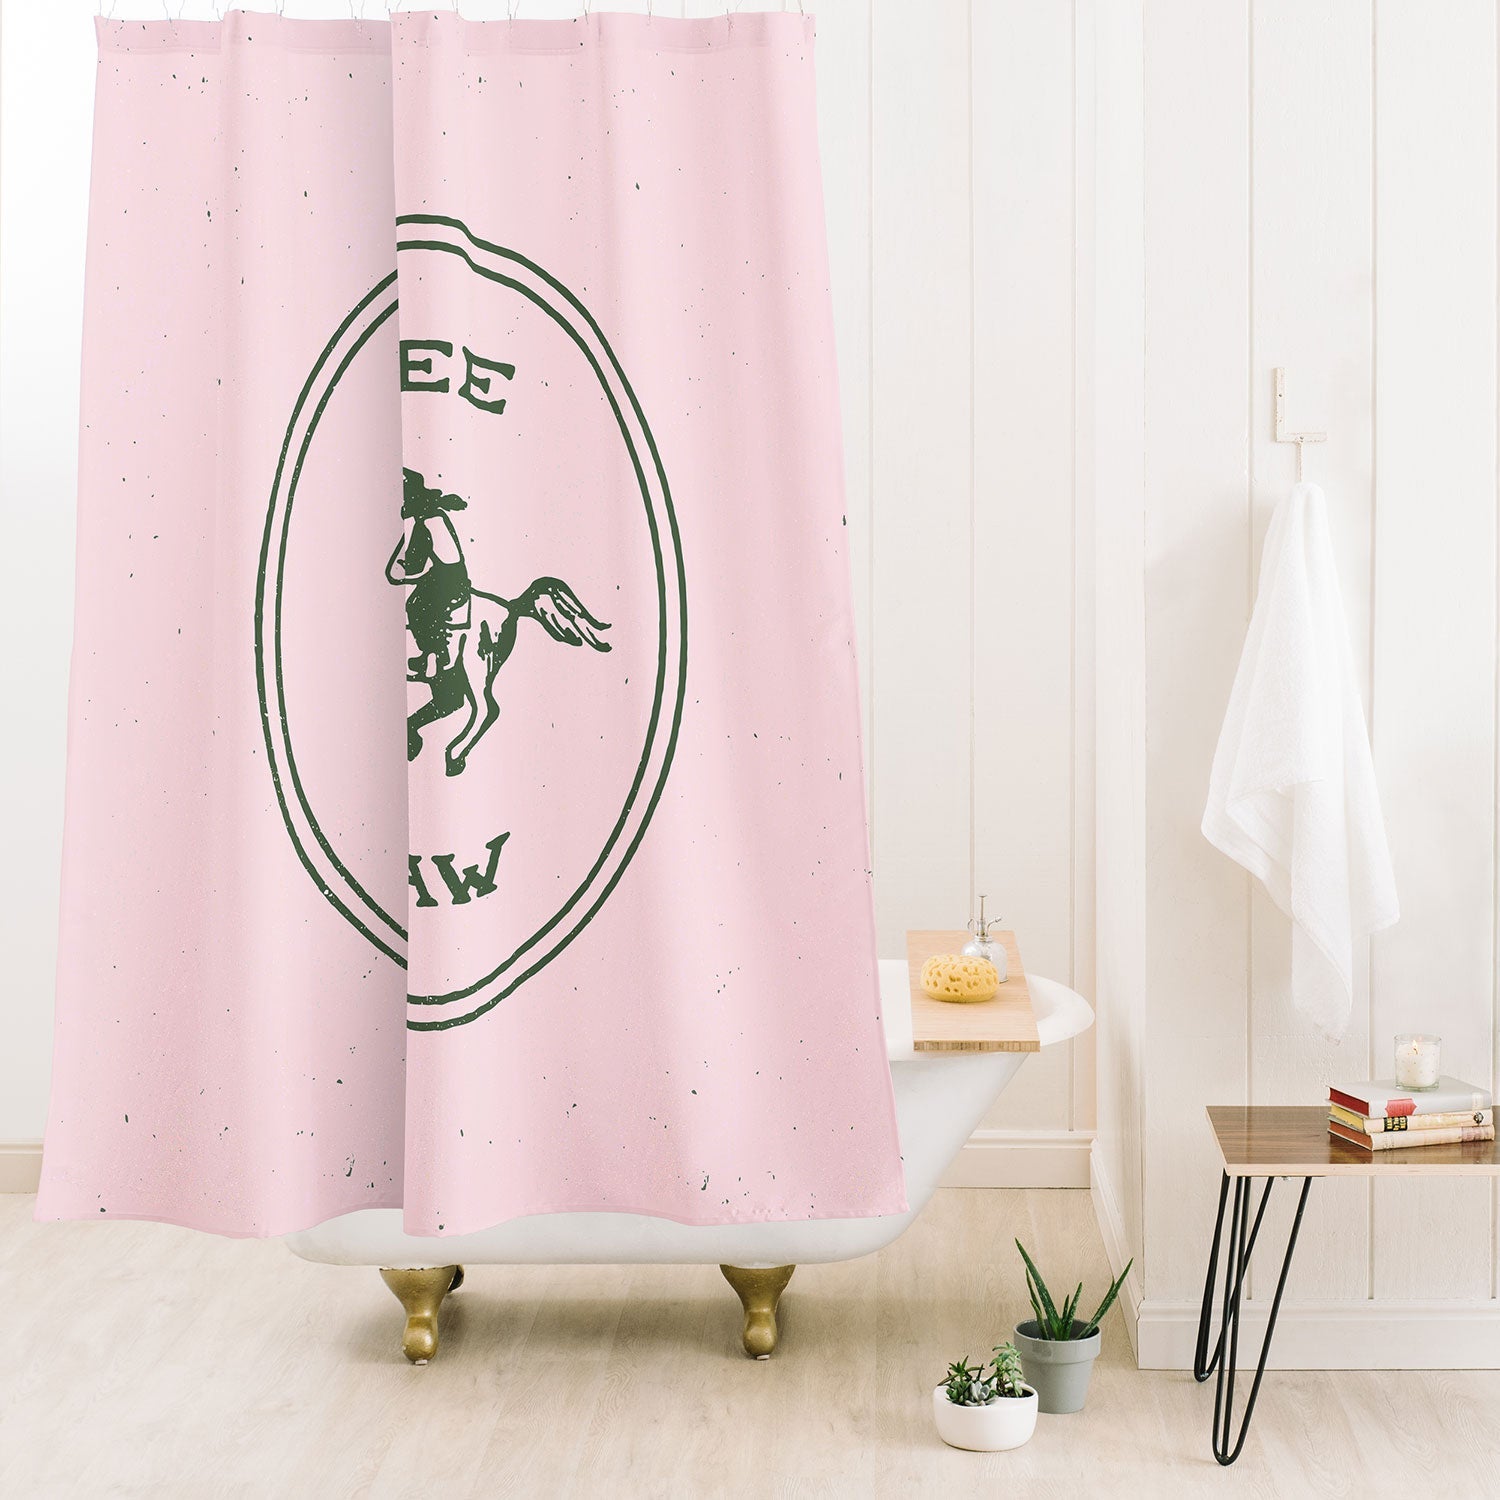 Yee Haw in Pink Shower Curtain (DS)